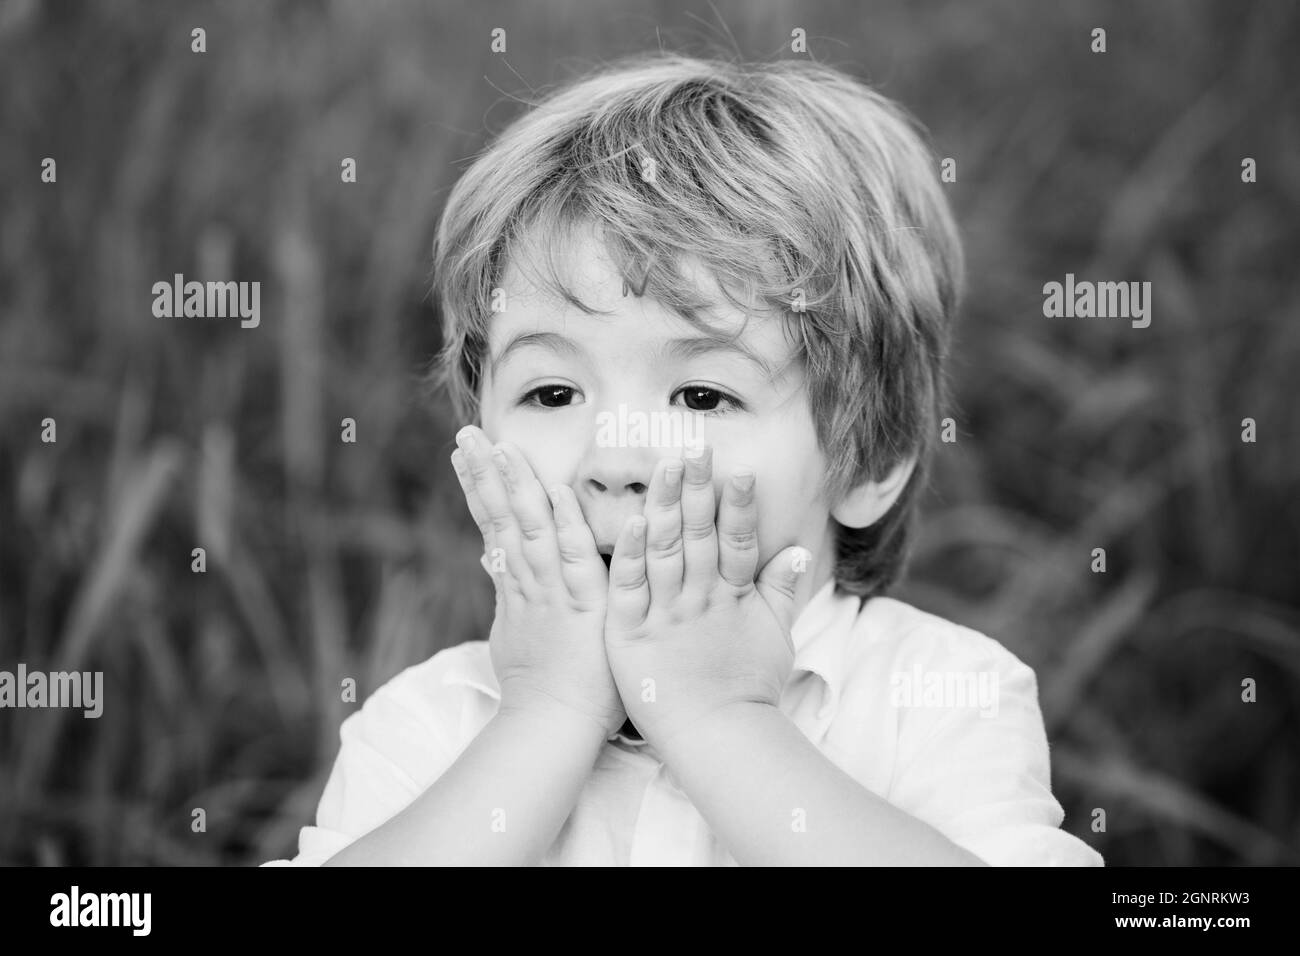 Funny child boy with hands close to face isolated on green background. Child expressing surprise with his hands in his face. Smiling amazed or Stock Photo